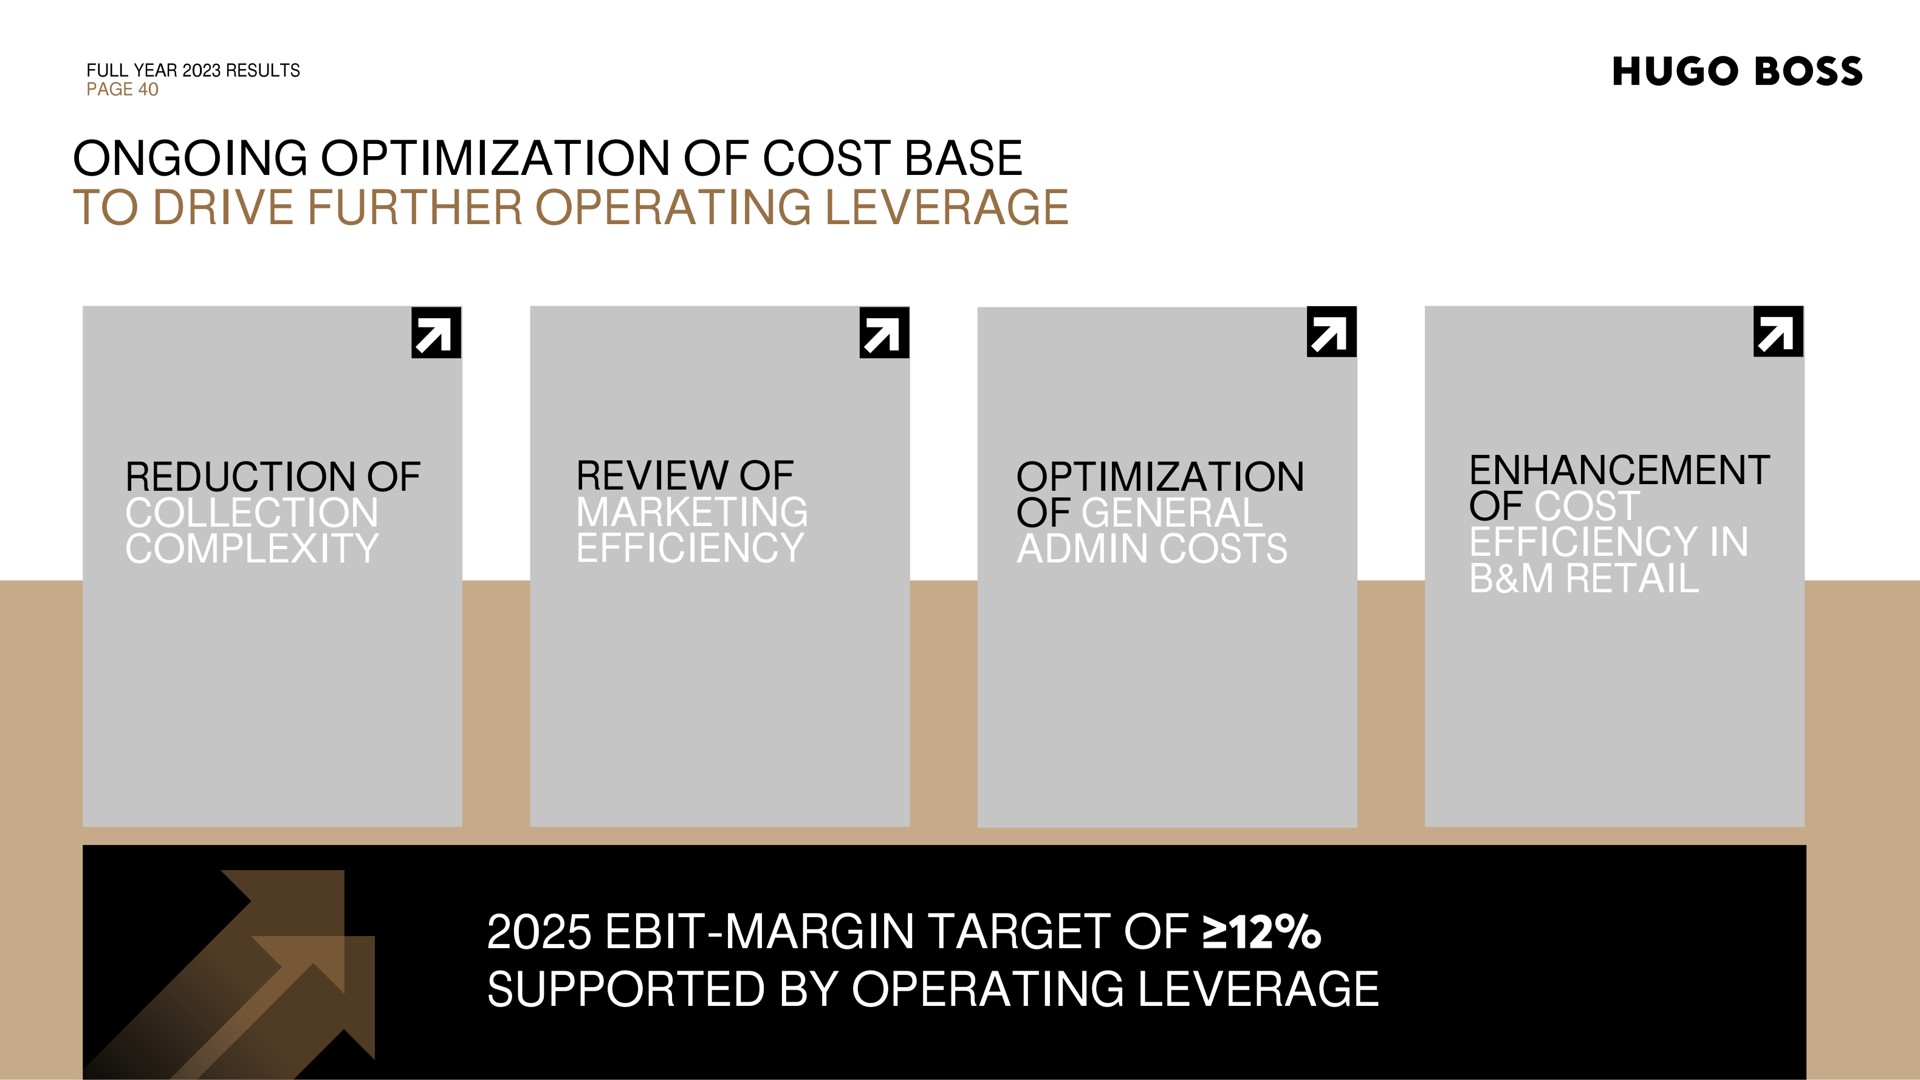 ongoing optimization of cost base to drive further operating leverage reduction of collection complexity review of marketing efficiency optimization of general costs enhancement of cost efficiency in retail margin target of supported by operating leverage boss ber ting rive a | Hugo Boss